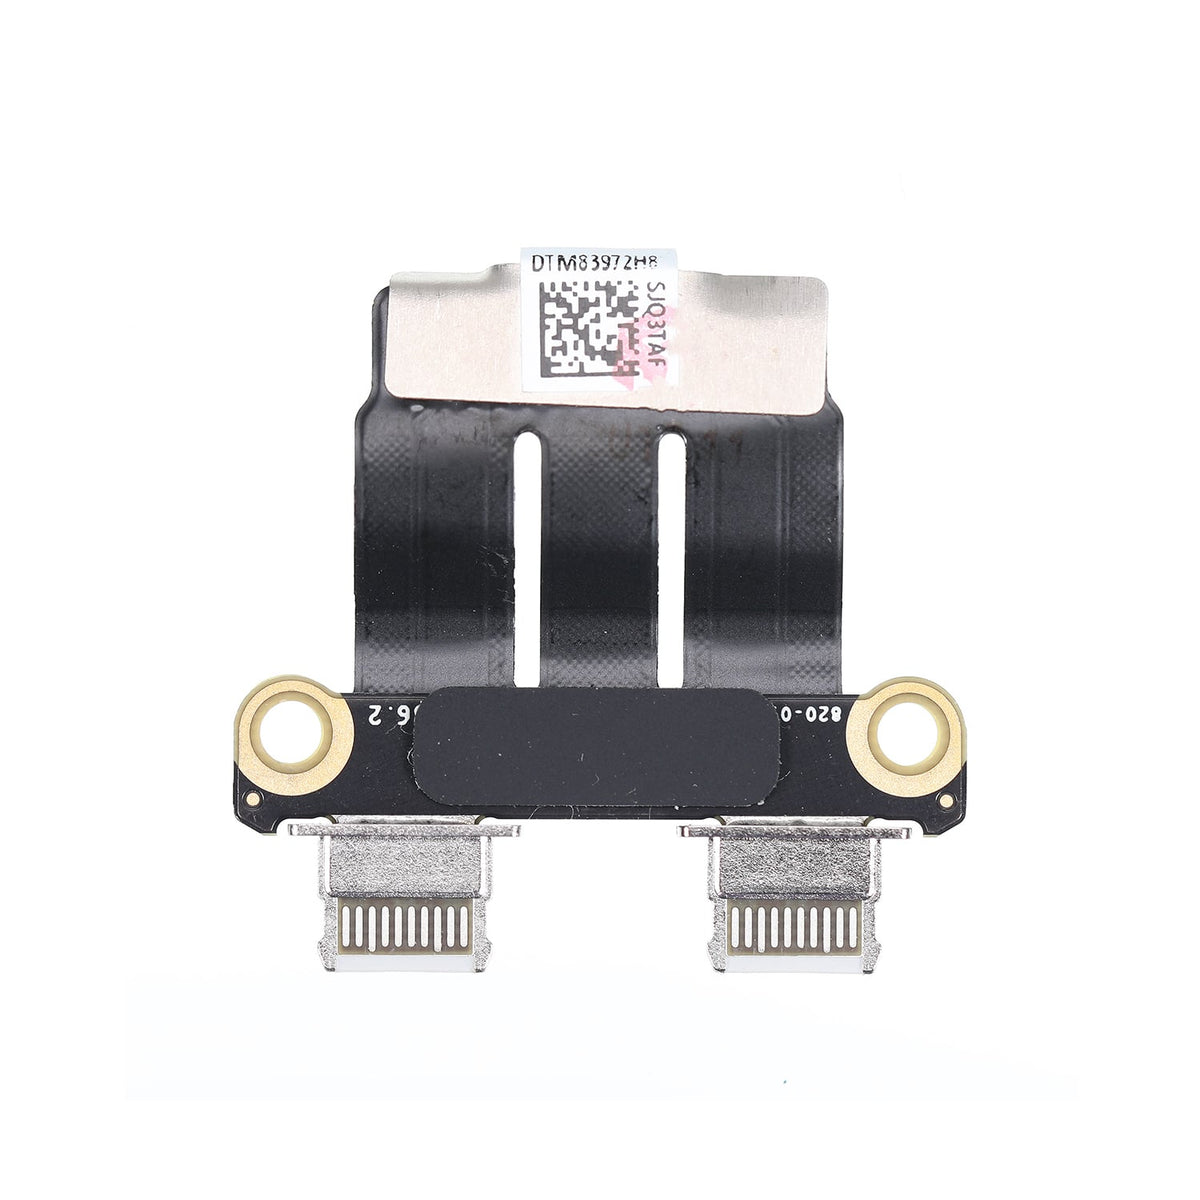 TYPE-C USB I/O BOARD CONNECTOR FOR MACBOOK A1989/A1990/A2159/A2251/A2289/A2141/A2337/A2338 (MID 2018, LATE 2020)